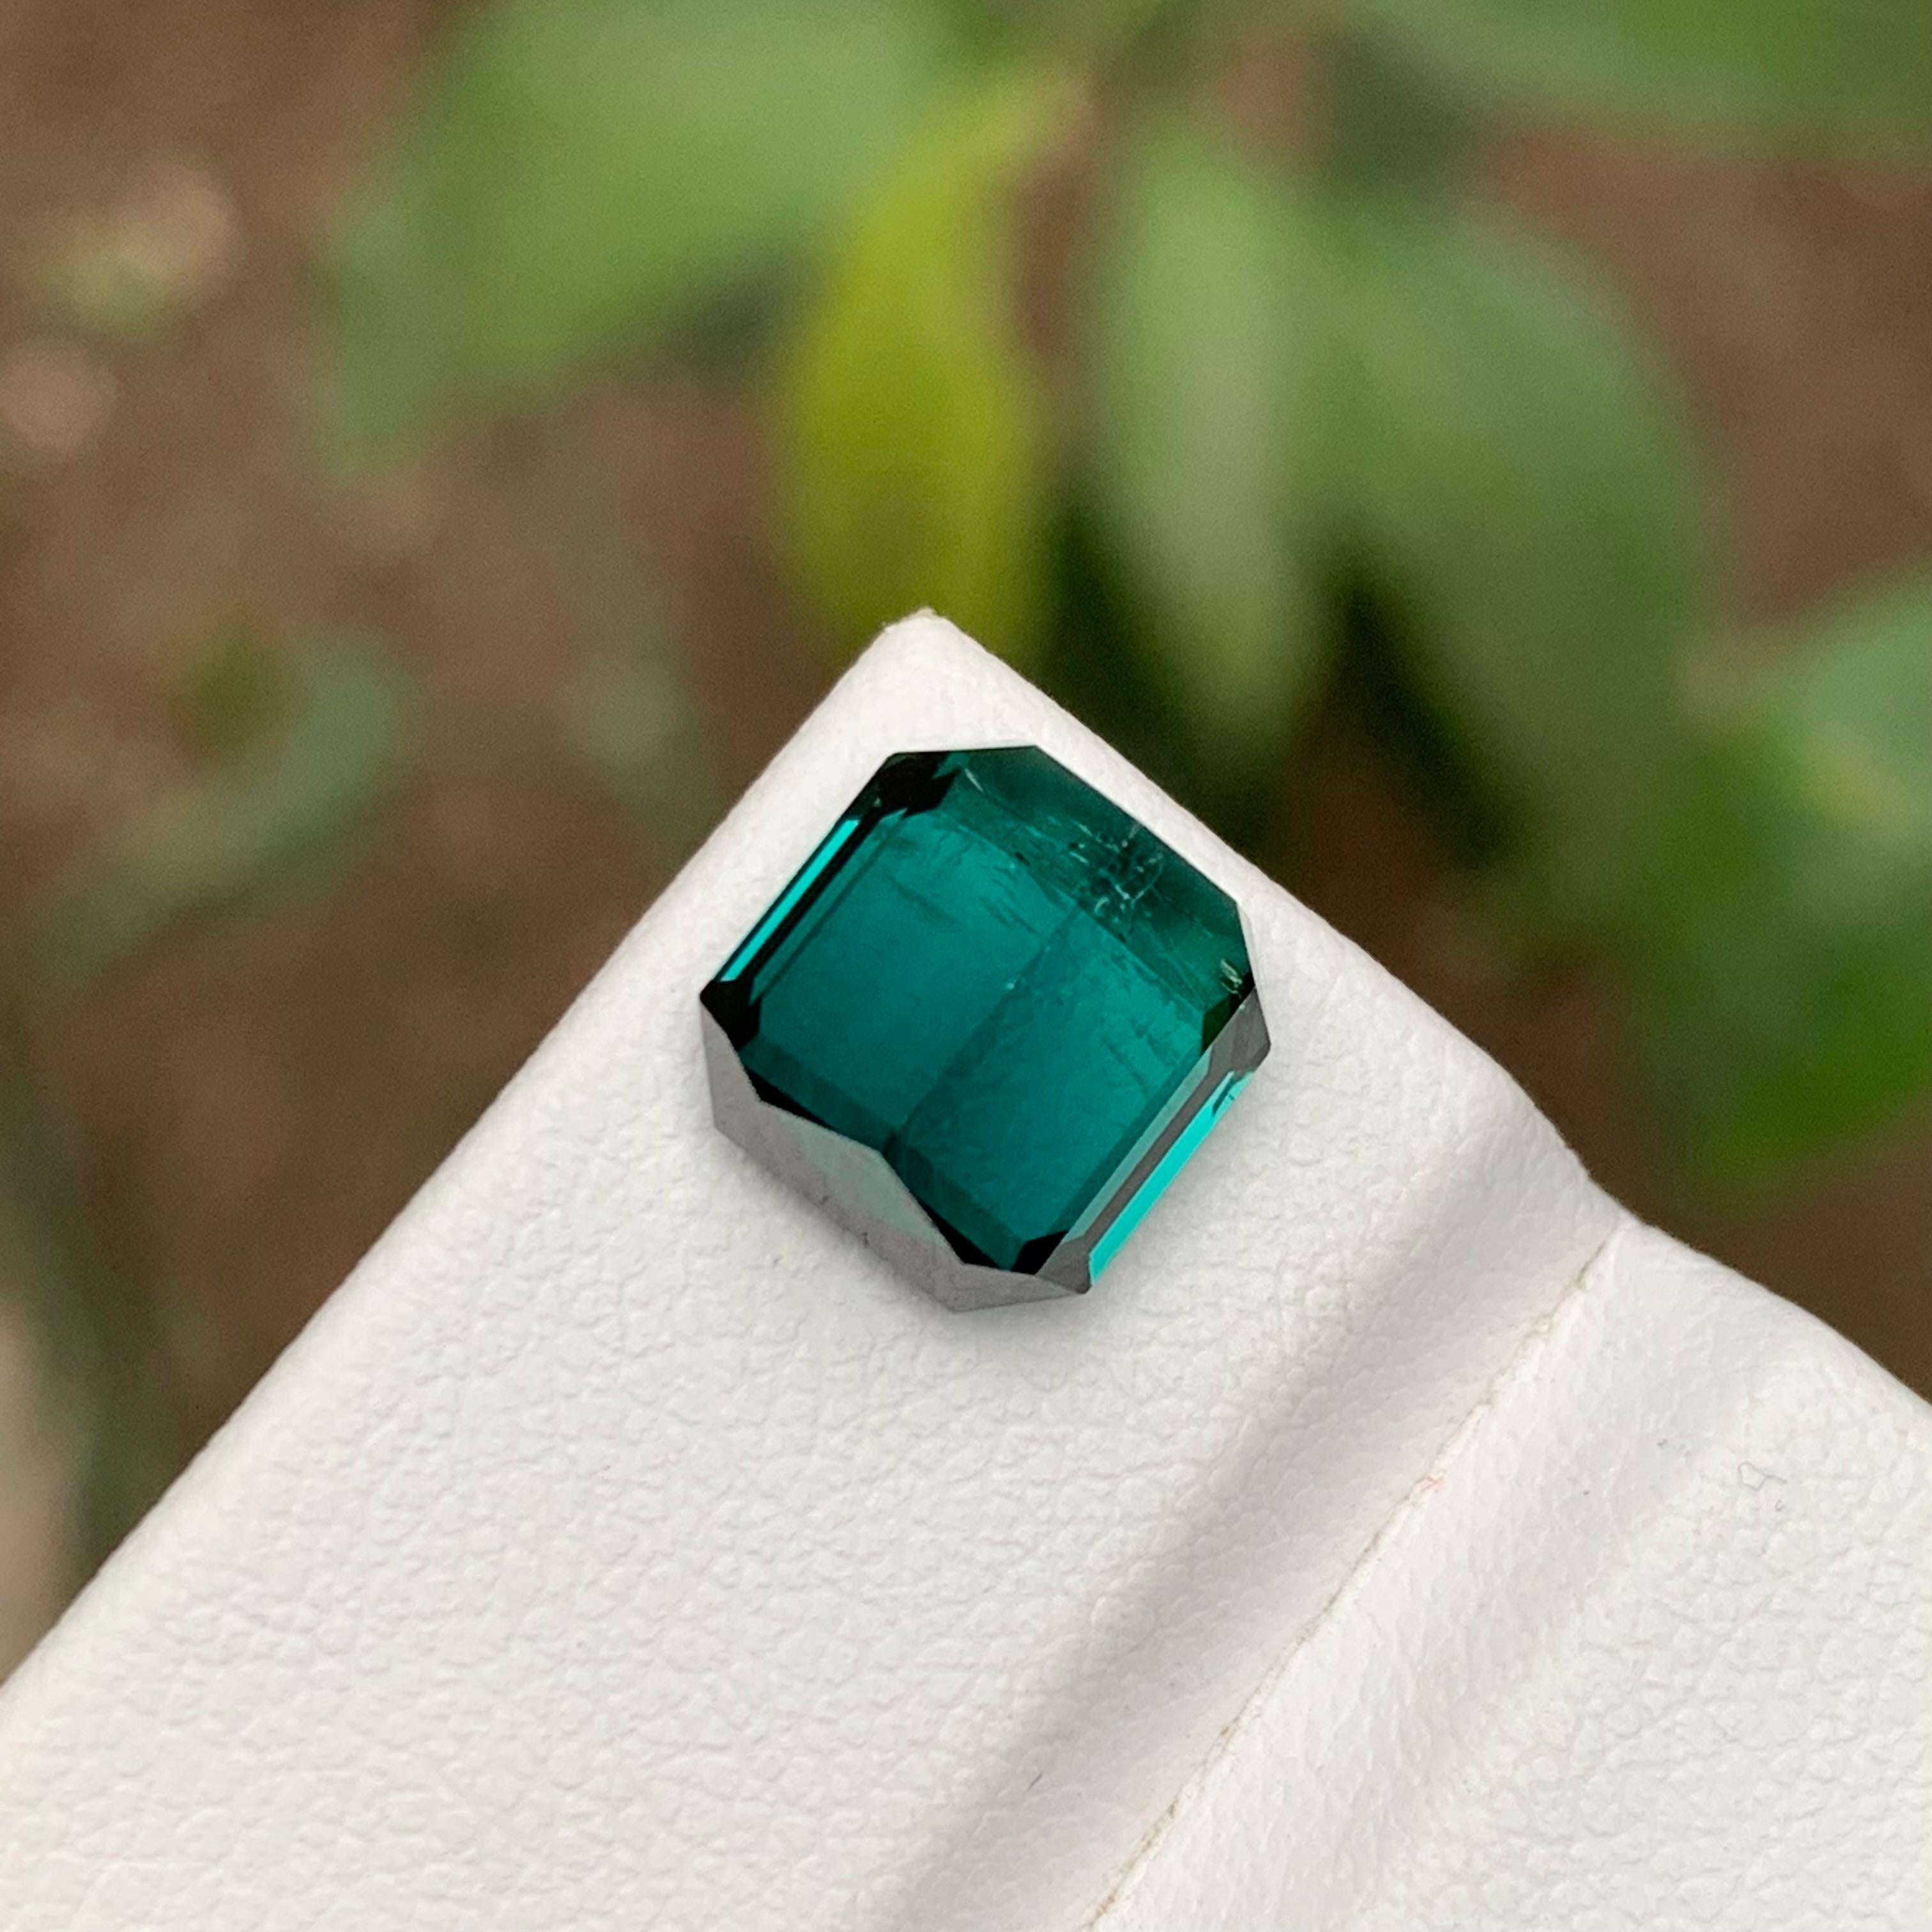 Rare Vibrant Lagoon Blue Natural Tourmaline Gemstone 4.20Ct Emerald Cut for Ring For Sale 3